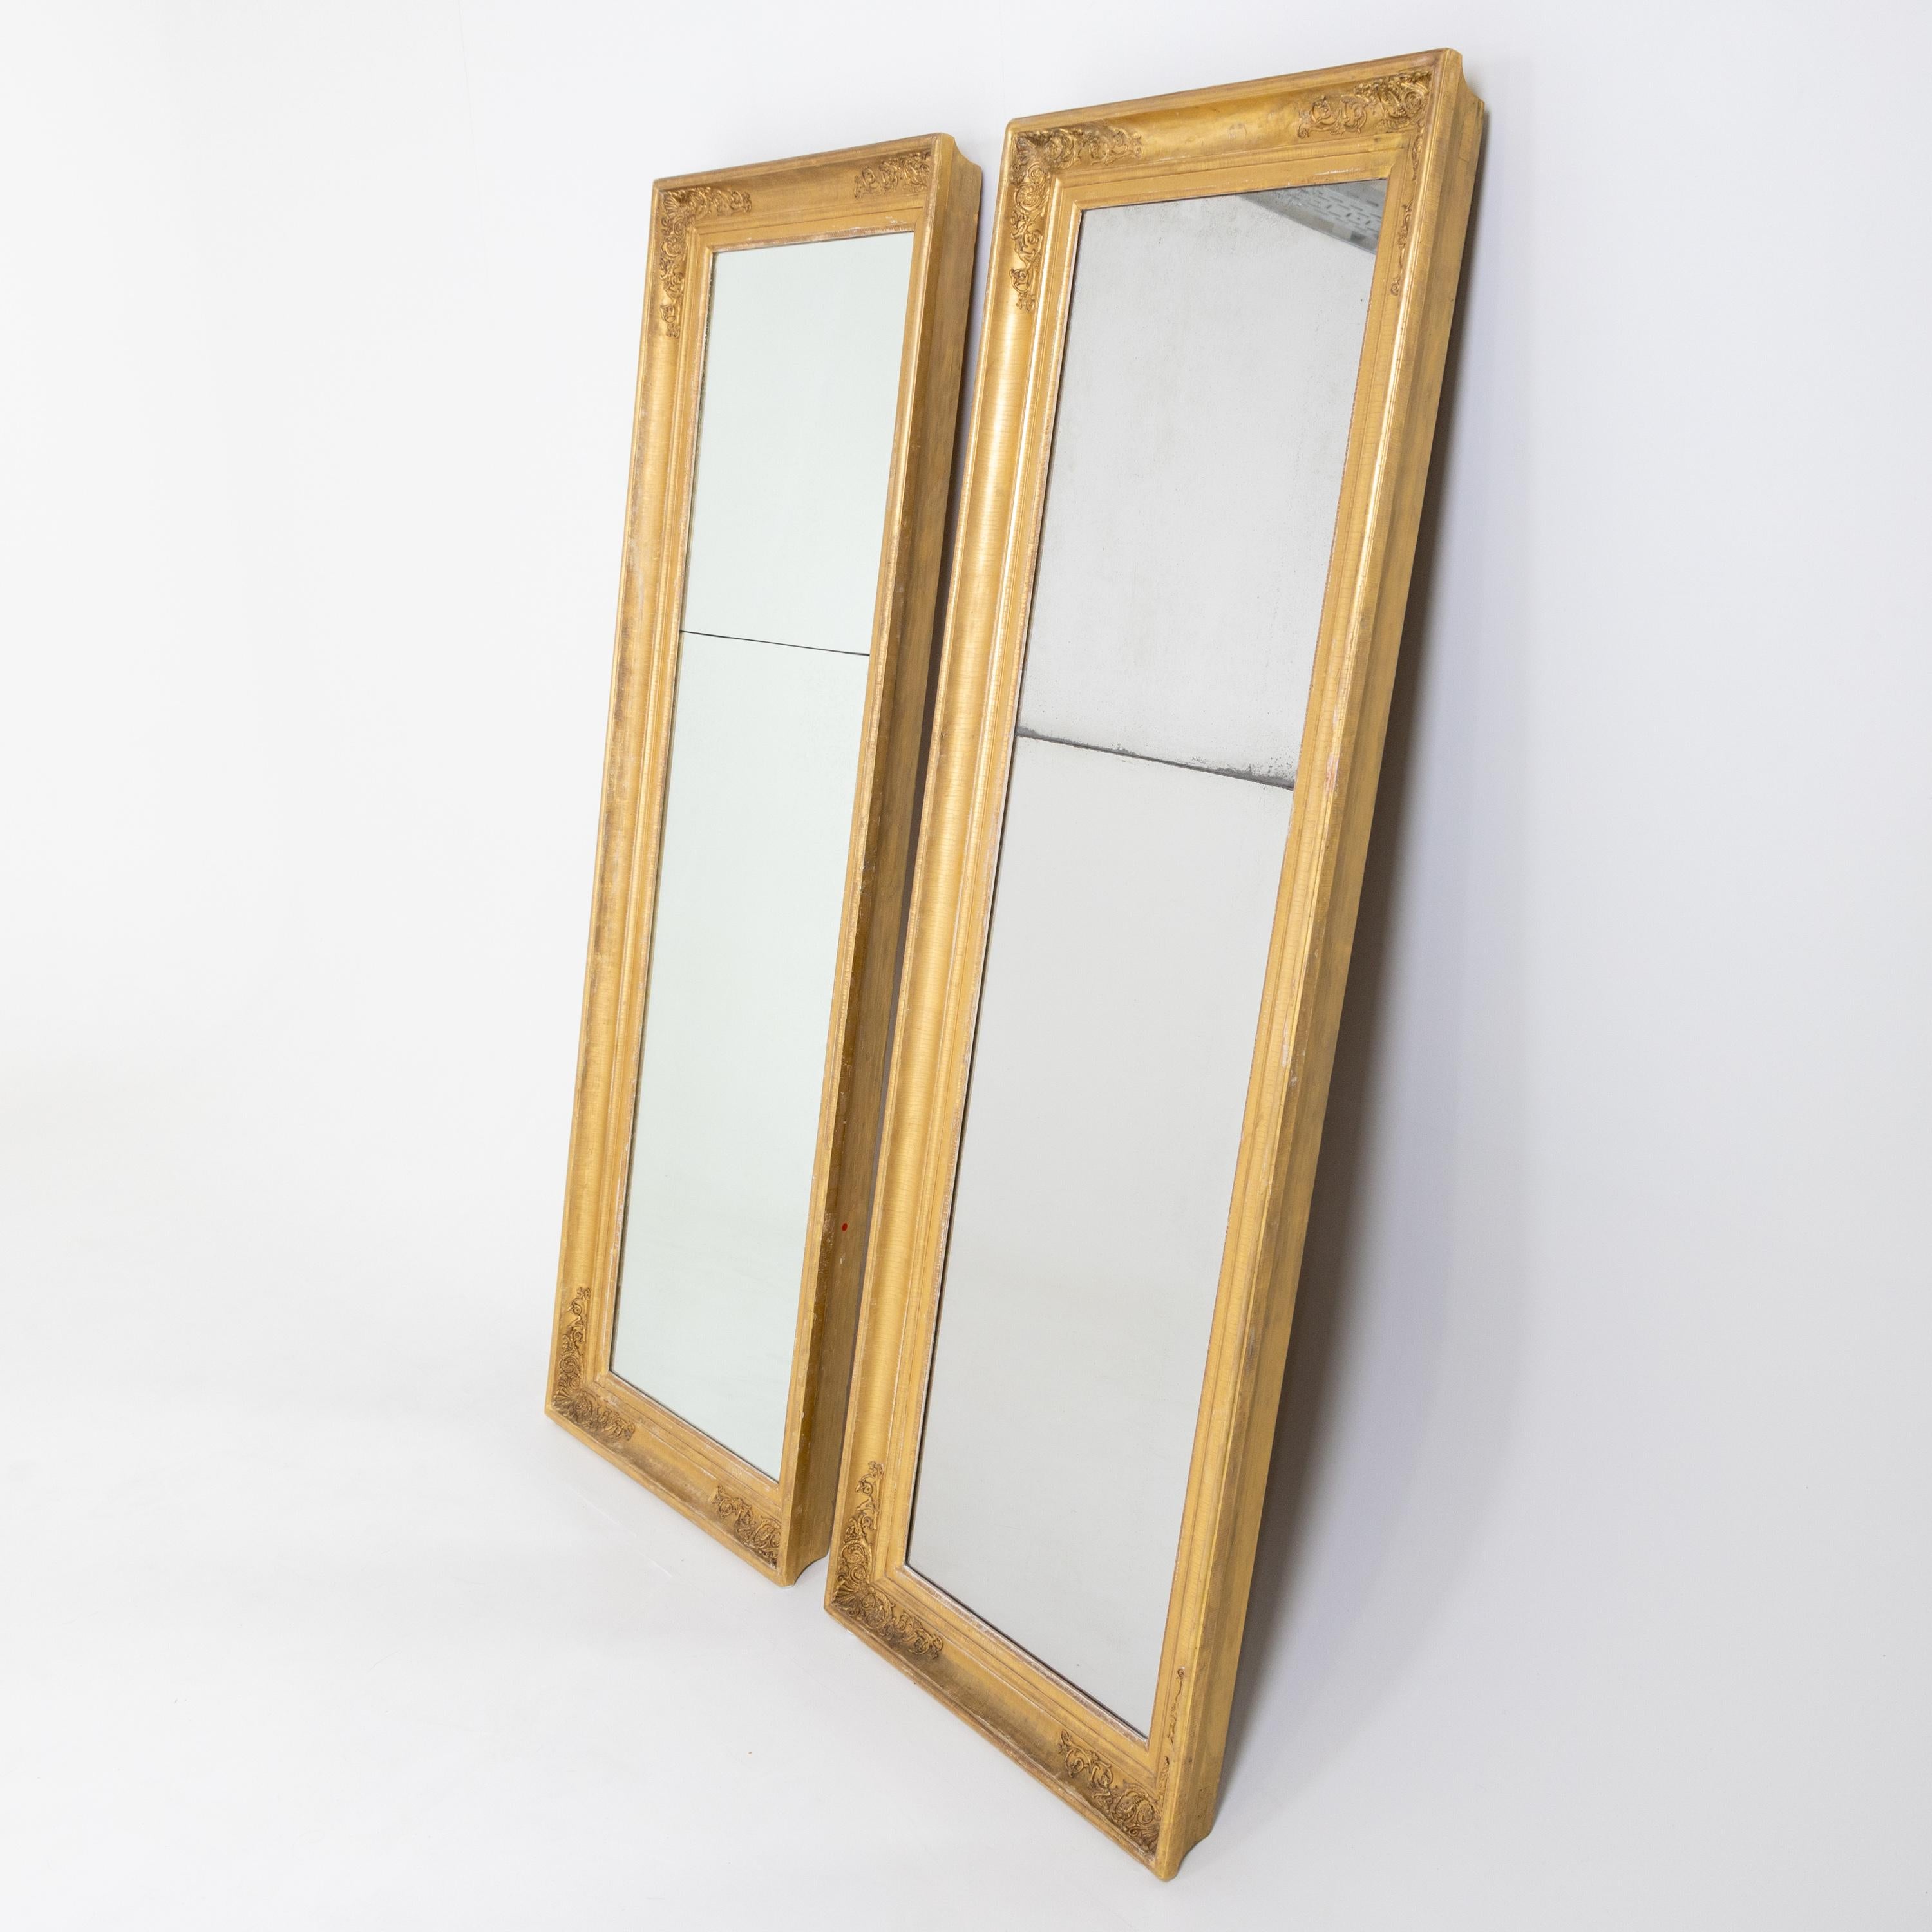 Pair of pillar mirrors in gold-patinated and stuccoed frame with profiled molding. The mirror panes are divided in the upper third. Patination is rubbed in places.

 